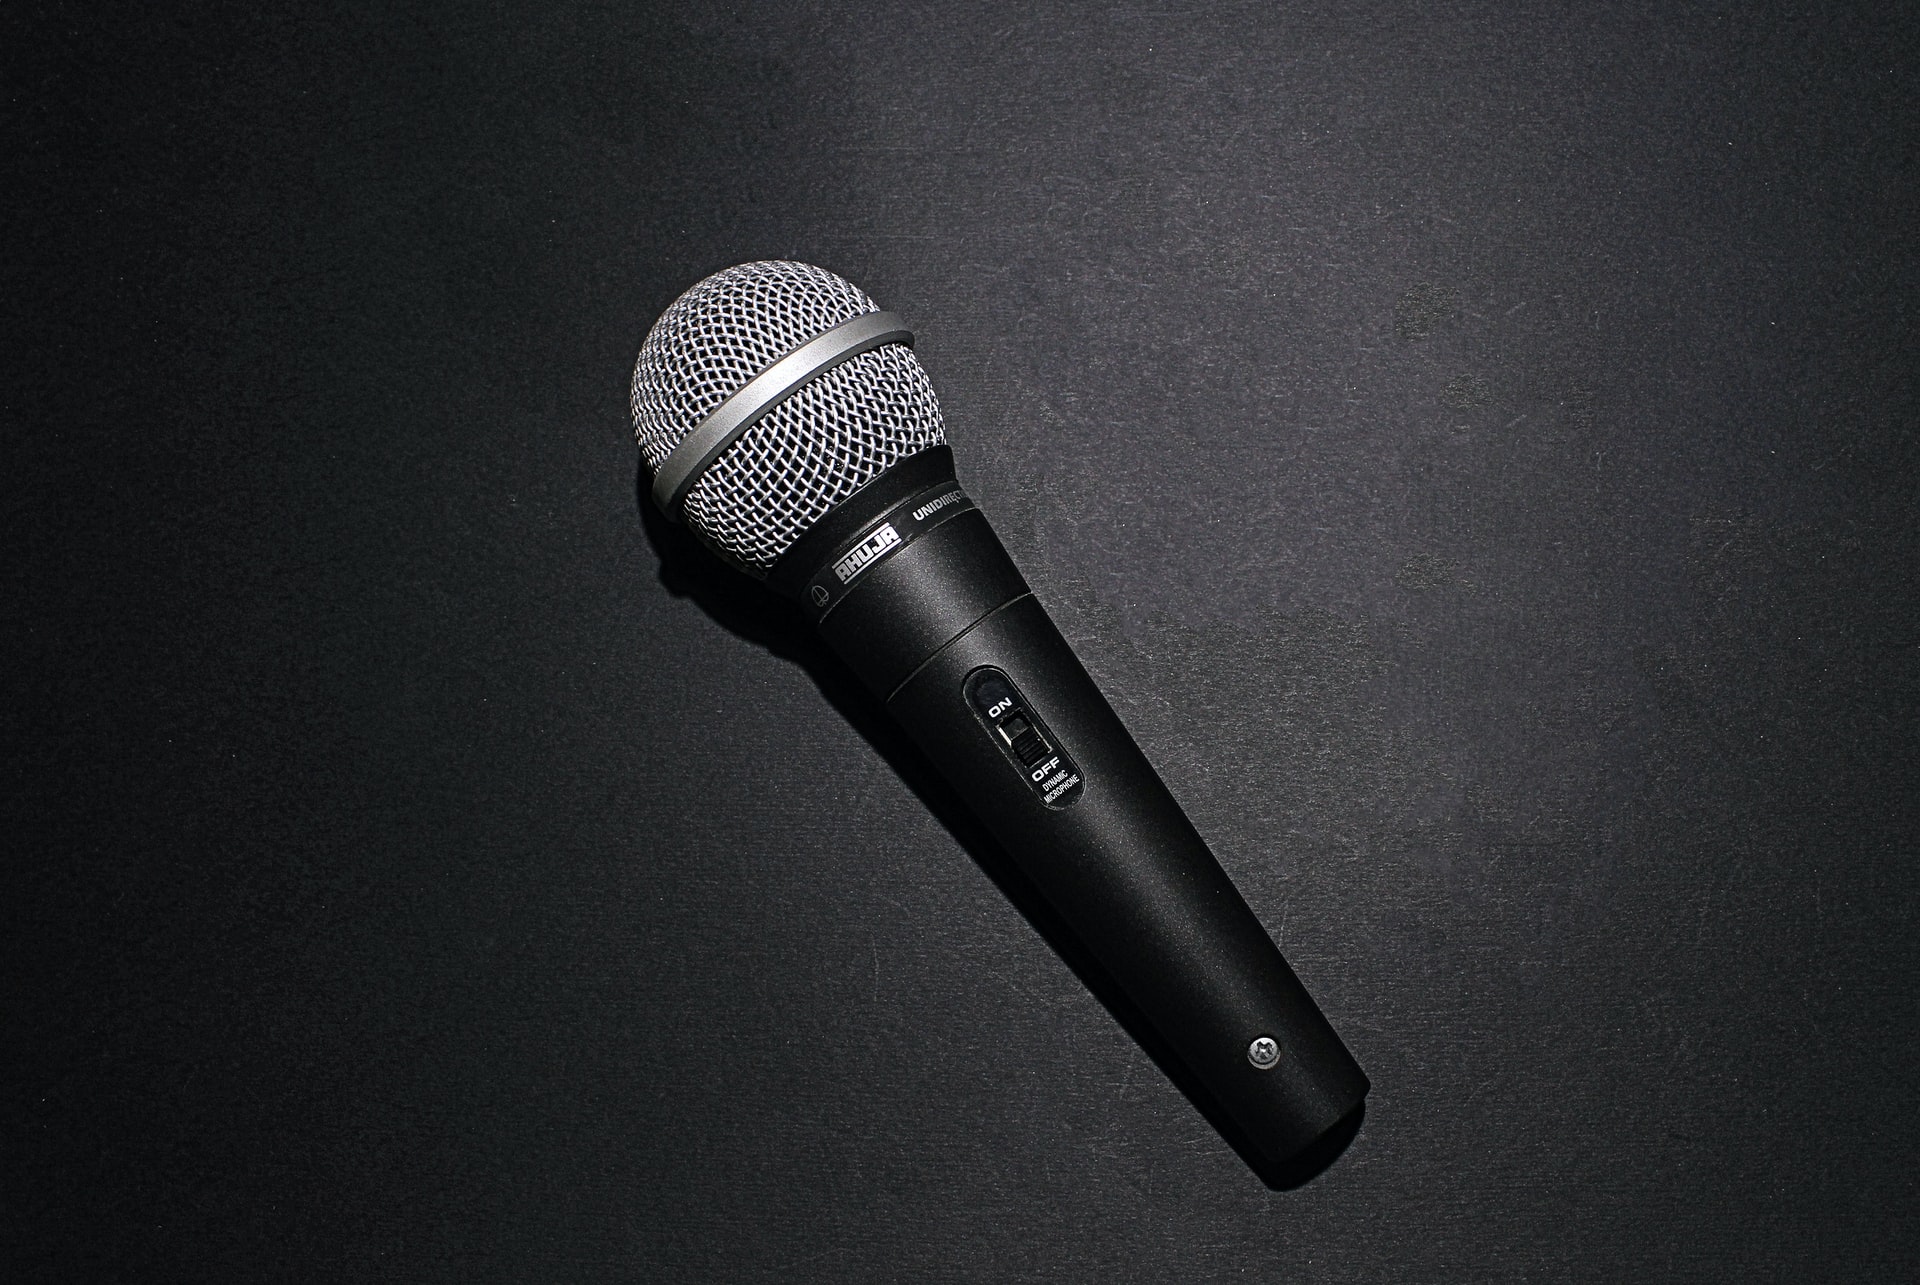 A photo of a microphone laying on a black surface.